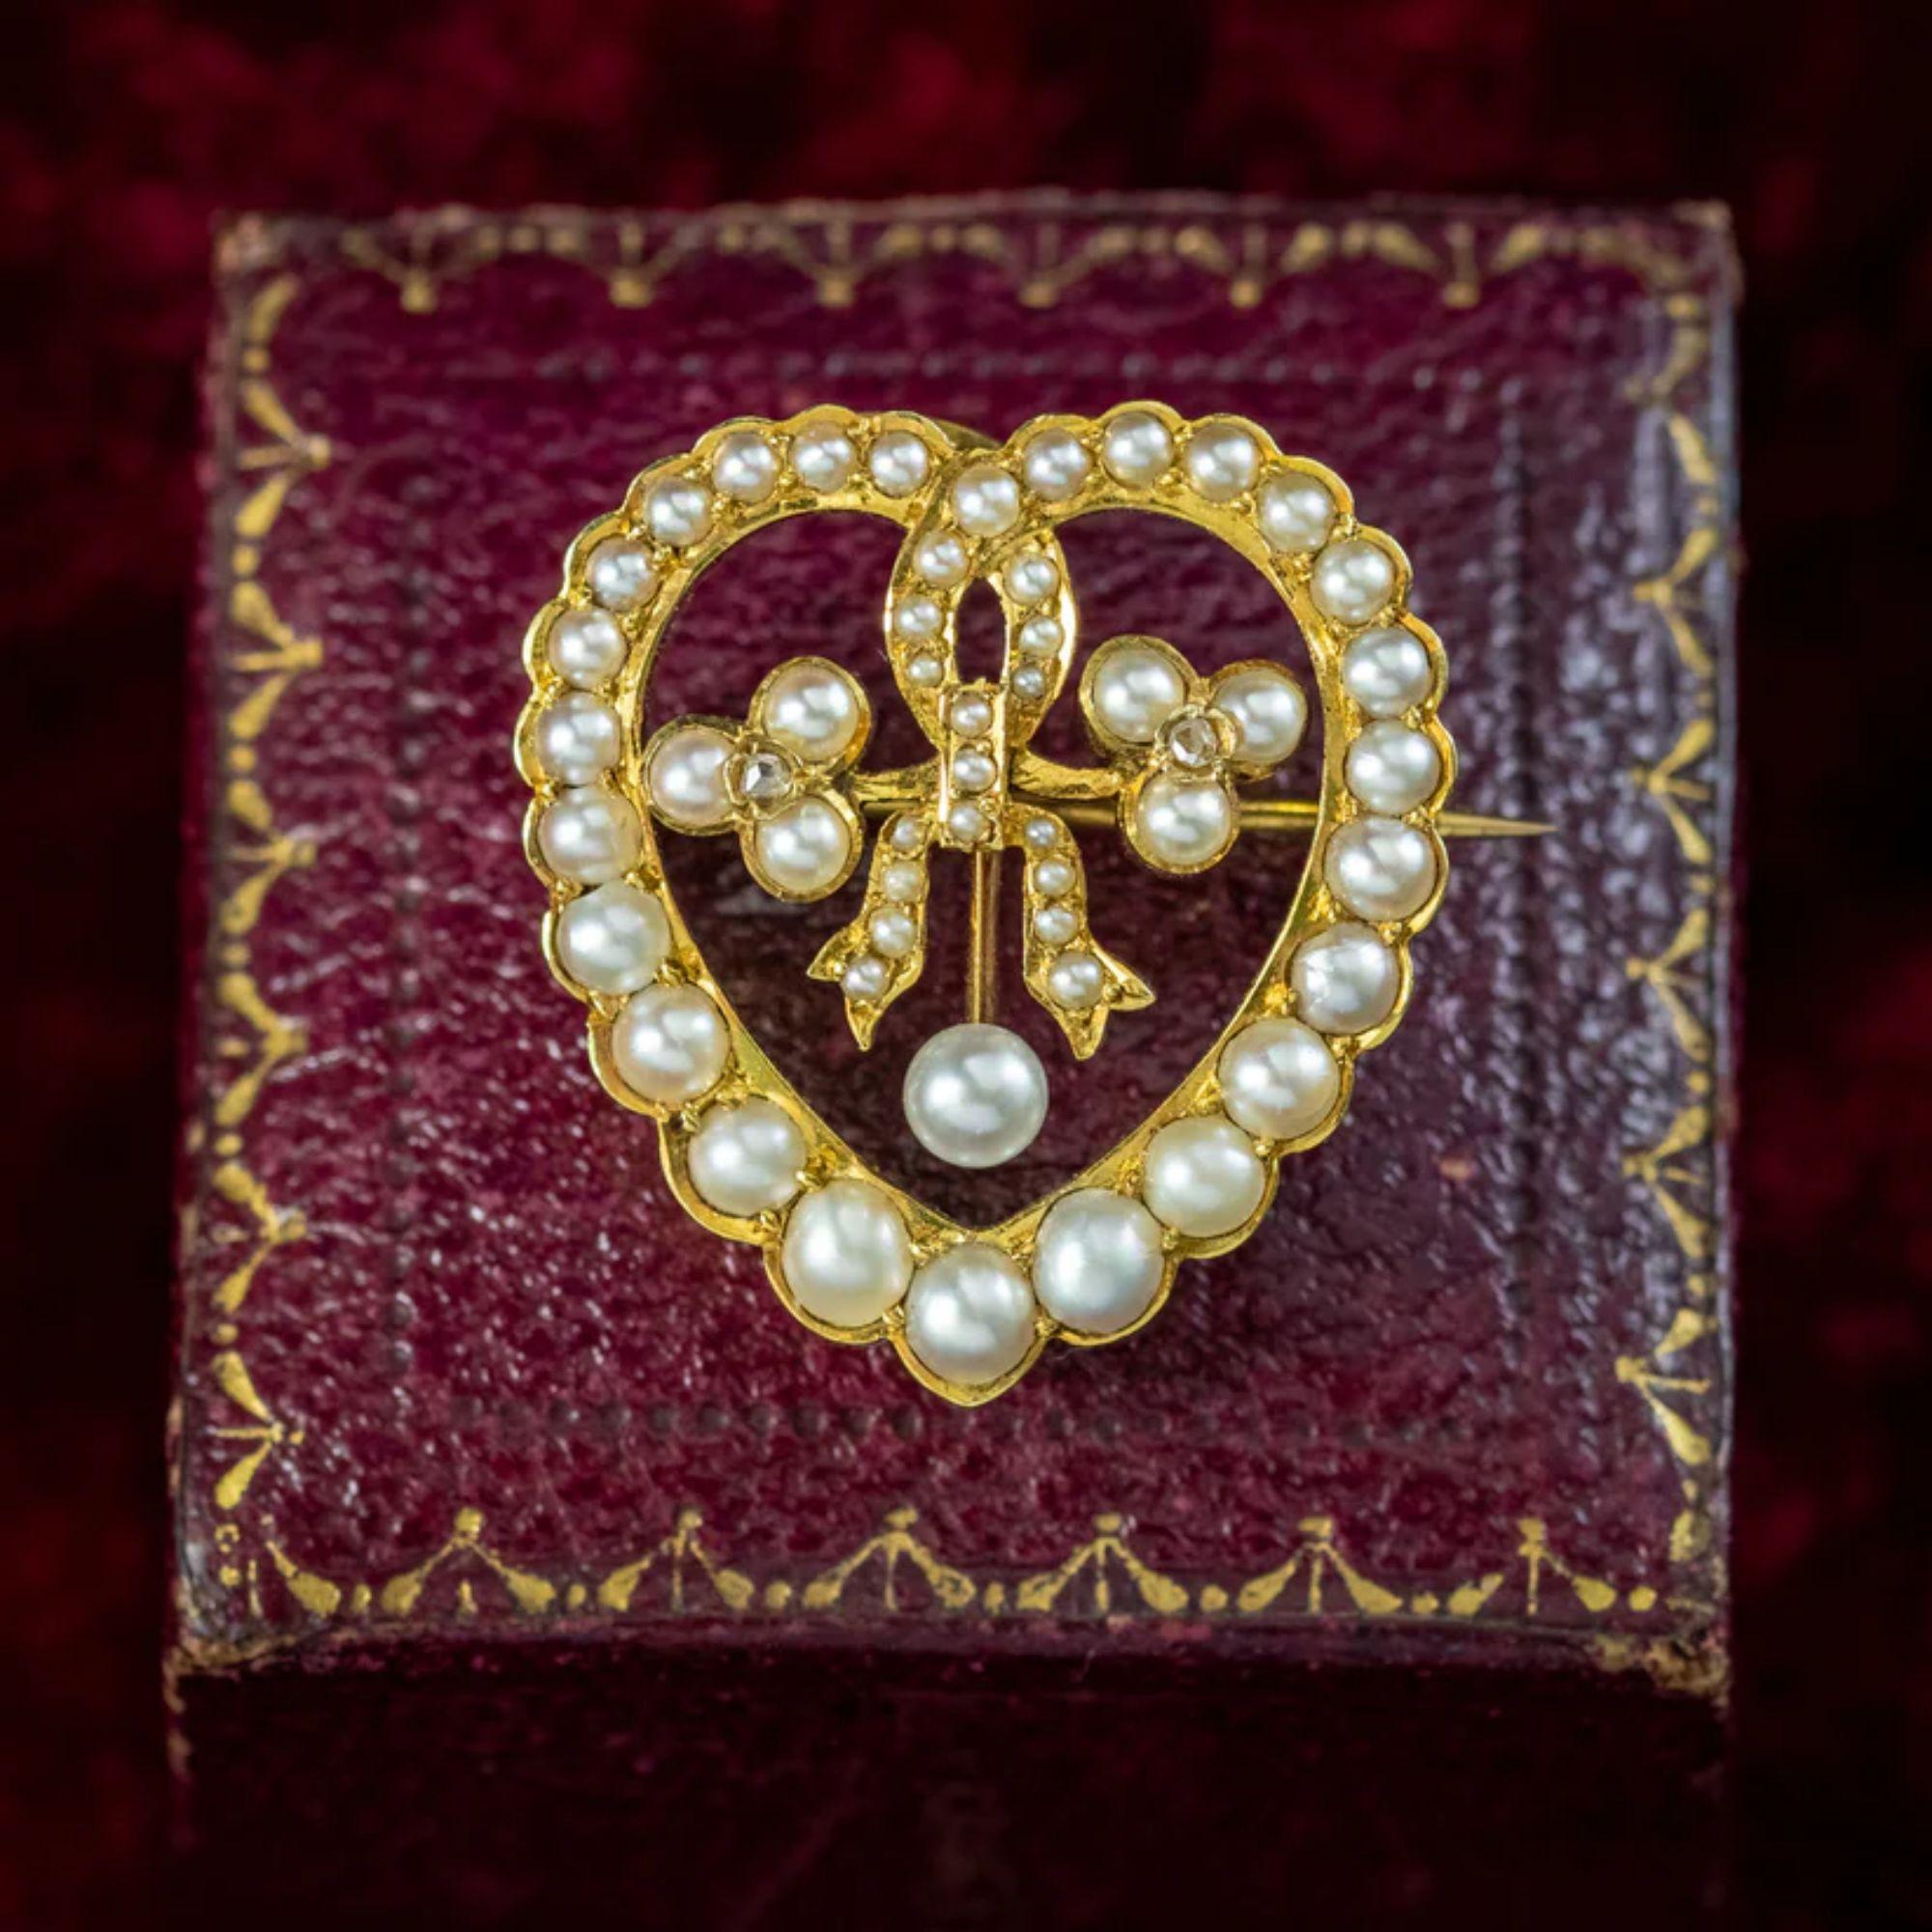 Antique Edwardian Pearl Diamond Heart Brooch in 15 Carat Gold, circa 1901 – 1915 For Sale 1